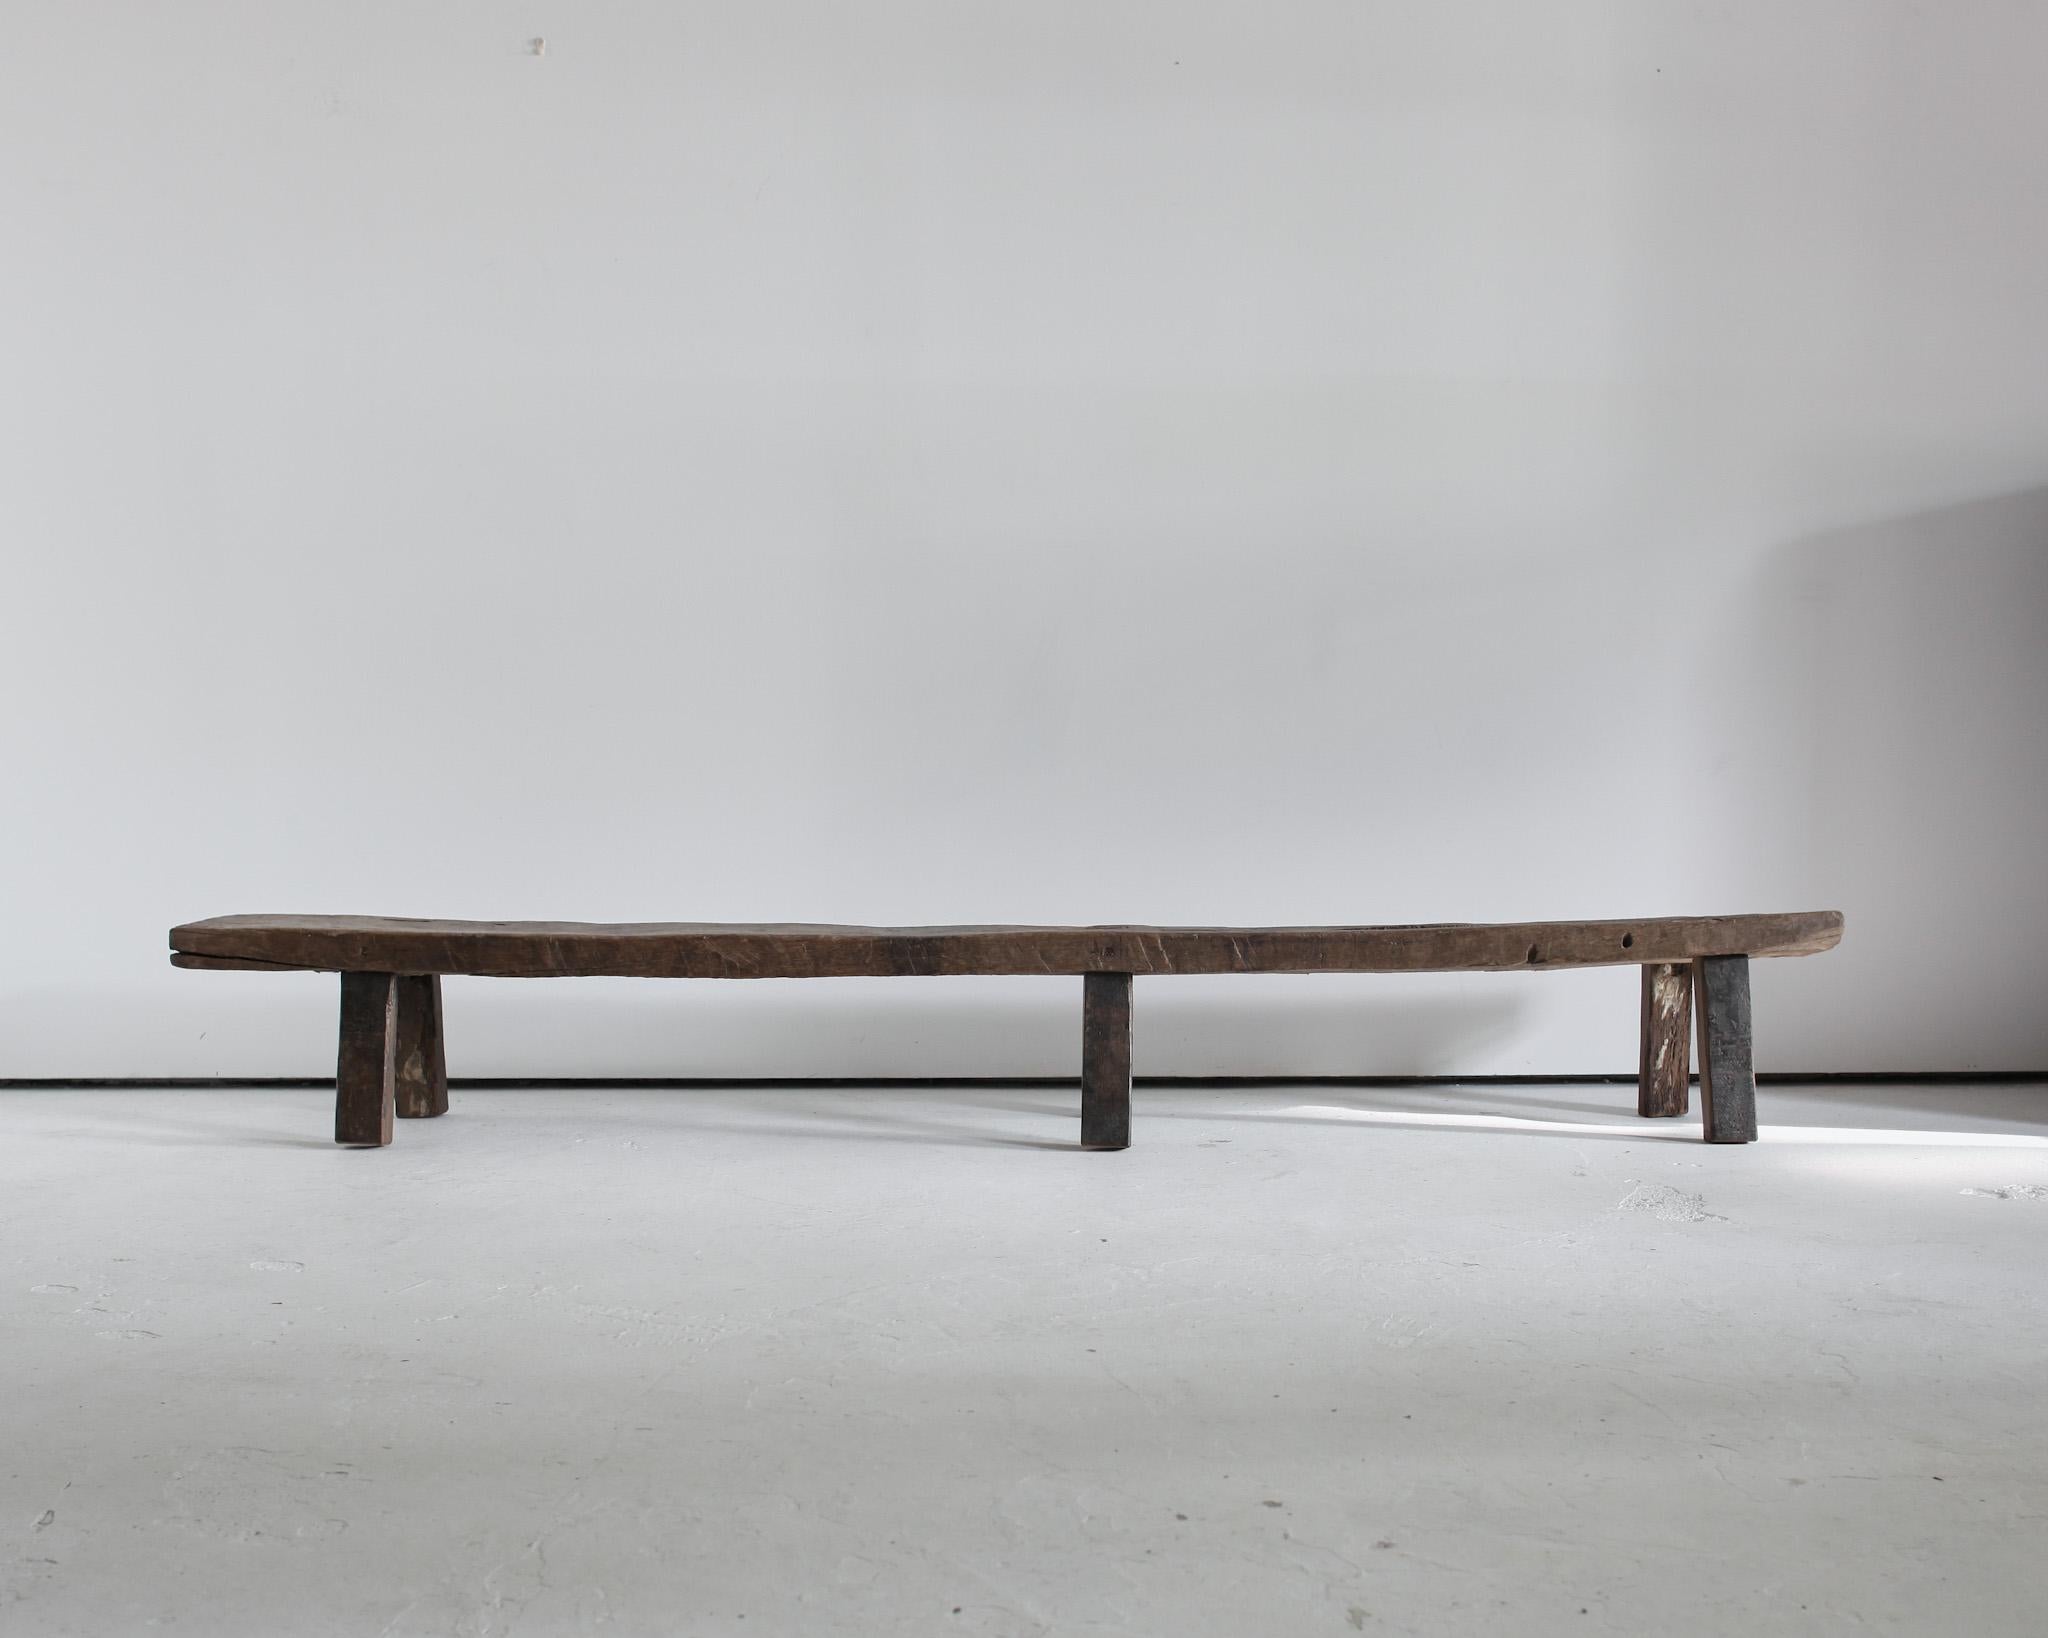 A very large Primitive 18th century. Bench from Navarra, Spain.
Constructed from one 7cm thick handcut slab of oak.
Heavily patinated with many age old repairs and later feet.